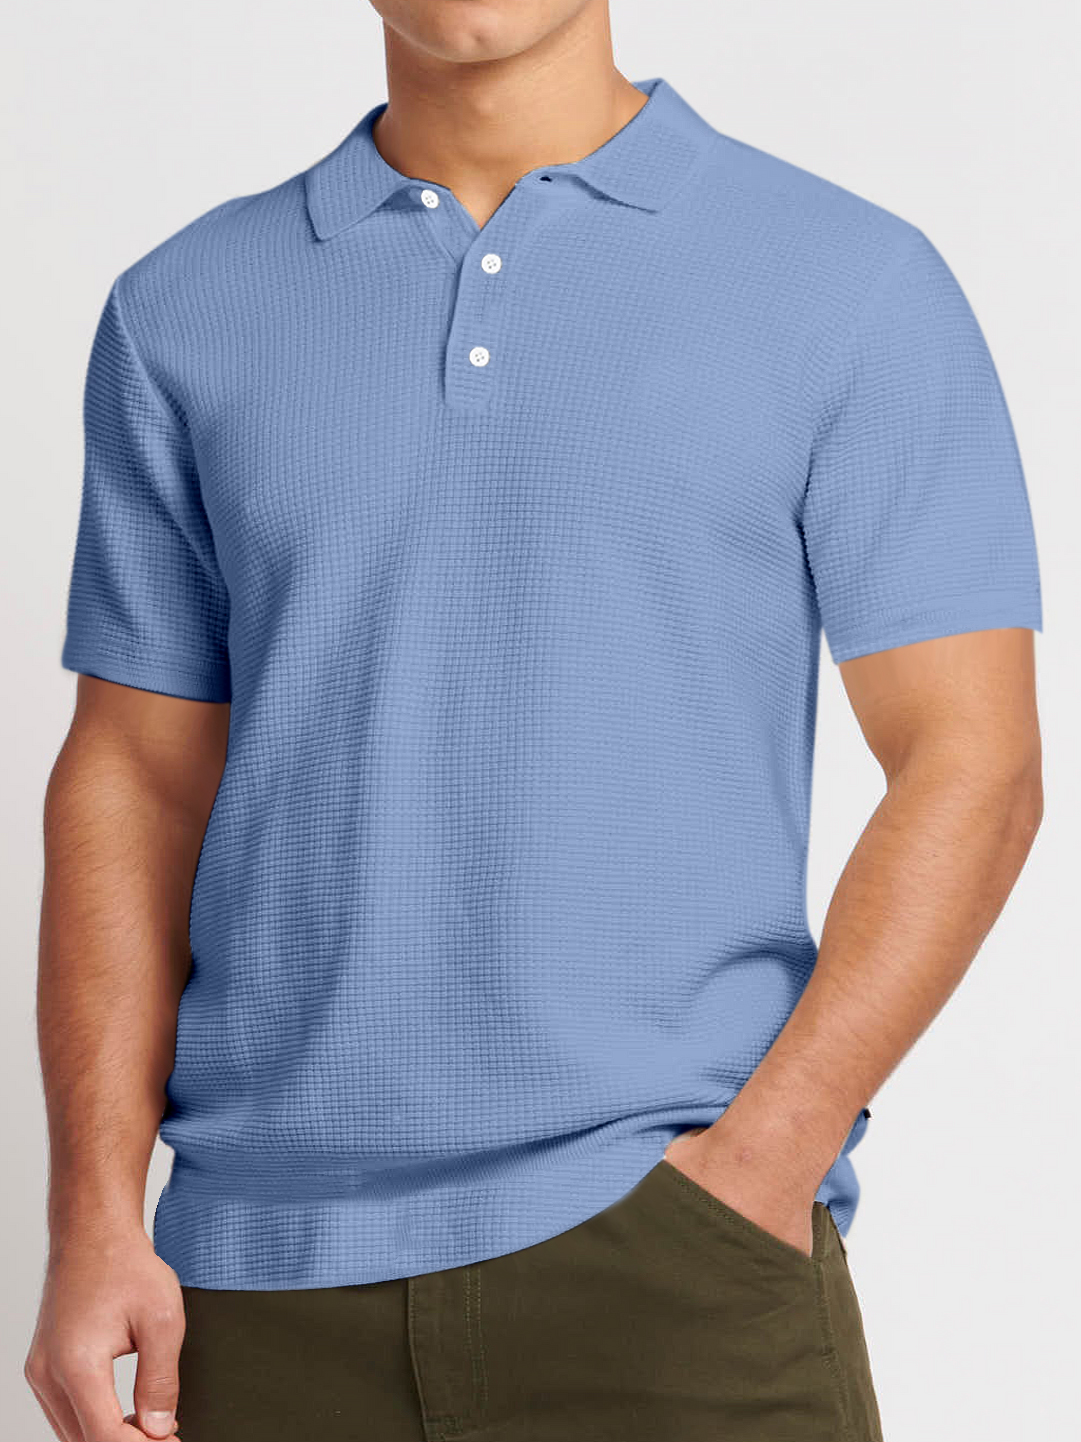 Men's Simple Solid Color Summer Waffle Short-sleeved Polo Shirt